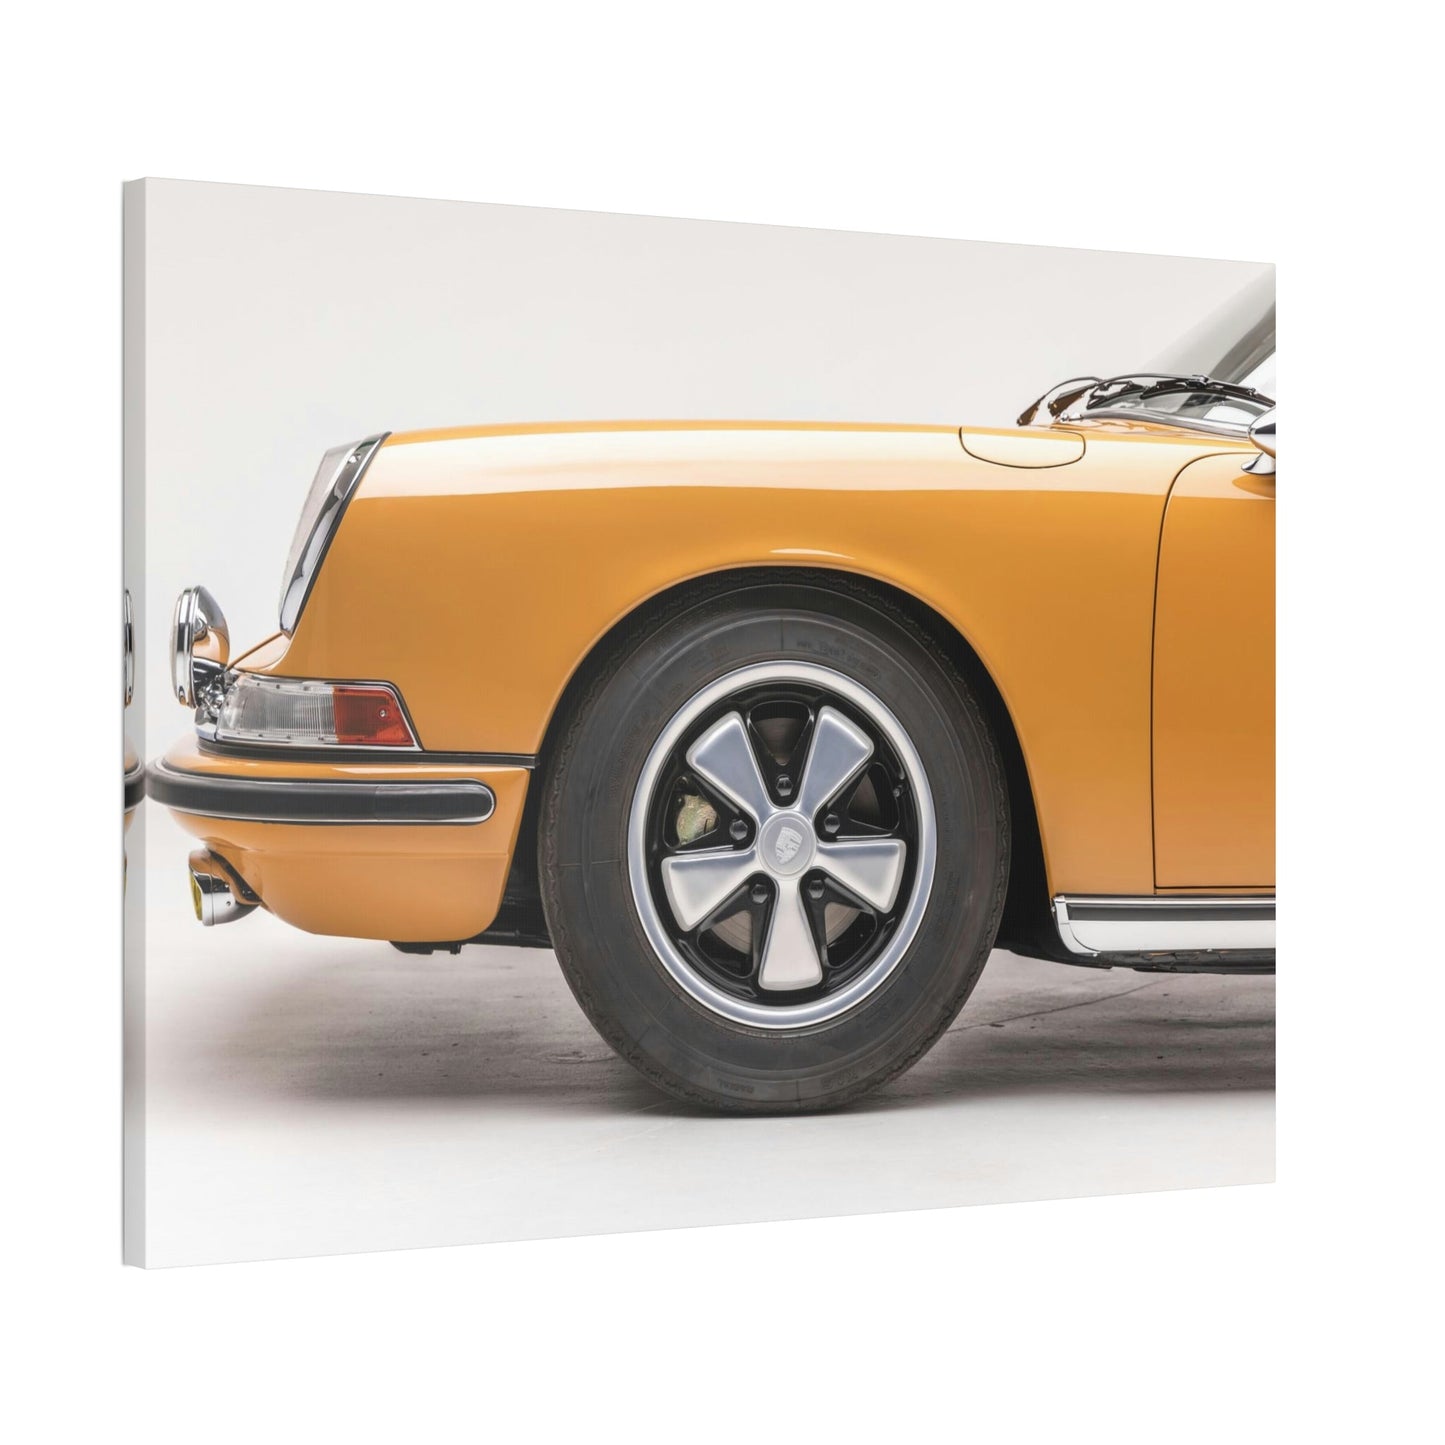 Porsche's Classic Elegance: Framed Poster & Canvas Showcasing the Car's Timeless Style